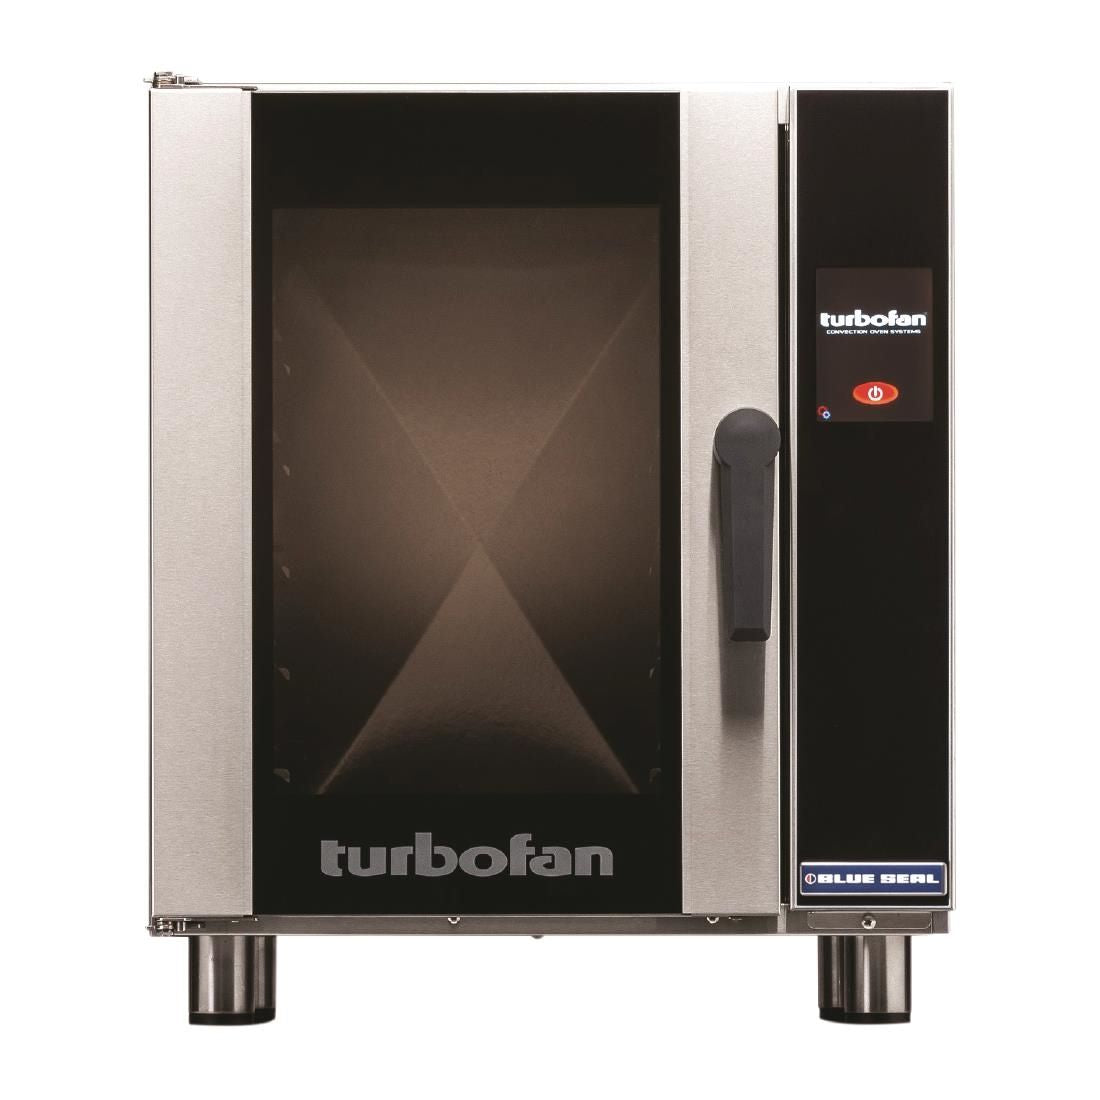 CP992 Blue Seal Turbofan Bolt Convection Oven E33T5 JD Catering Equipment Solutions Ltd